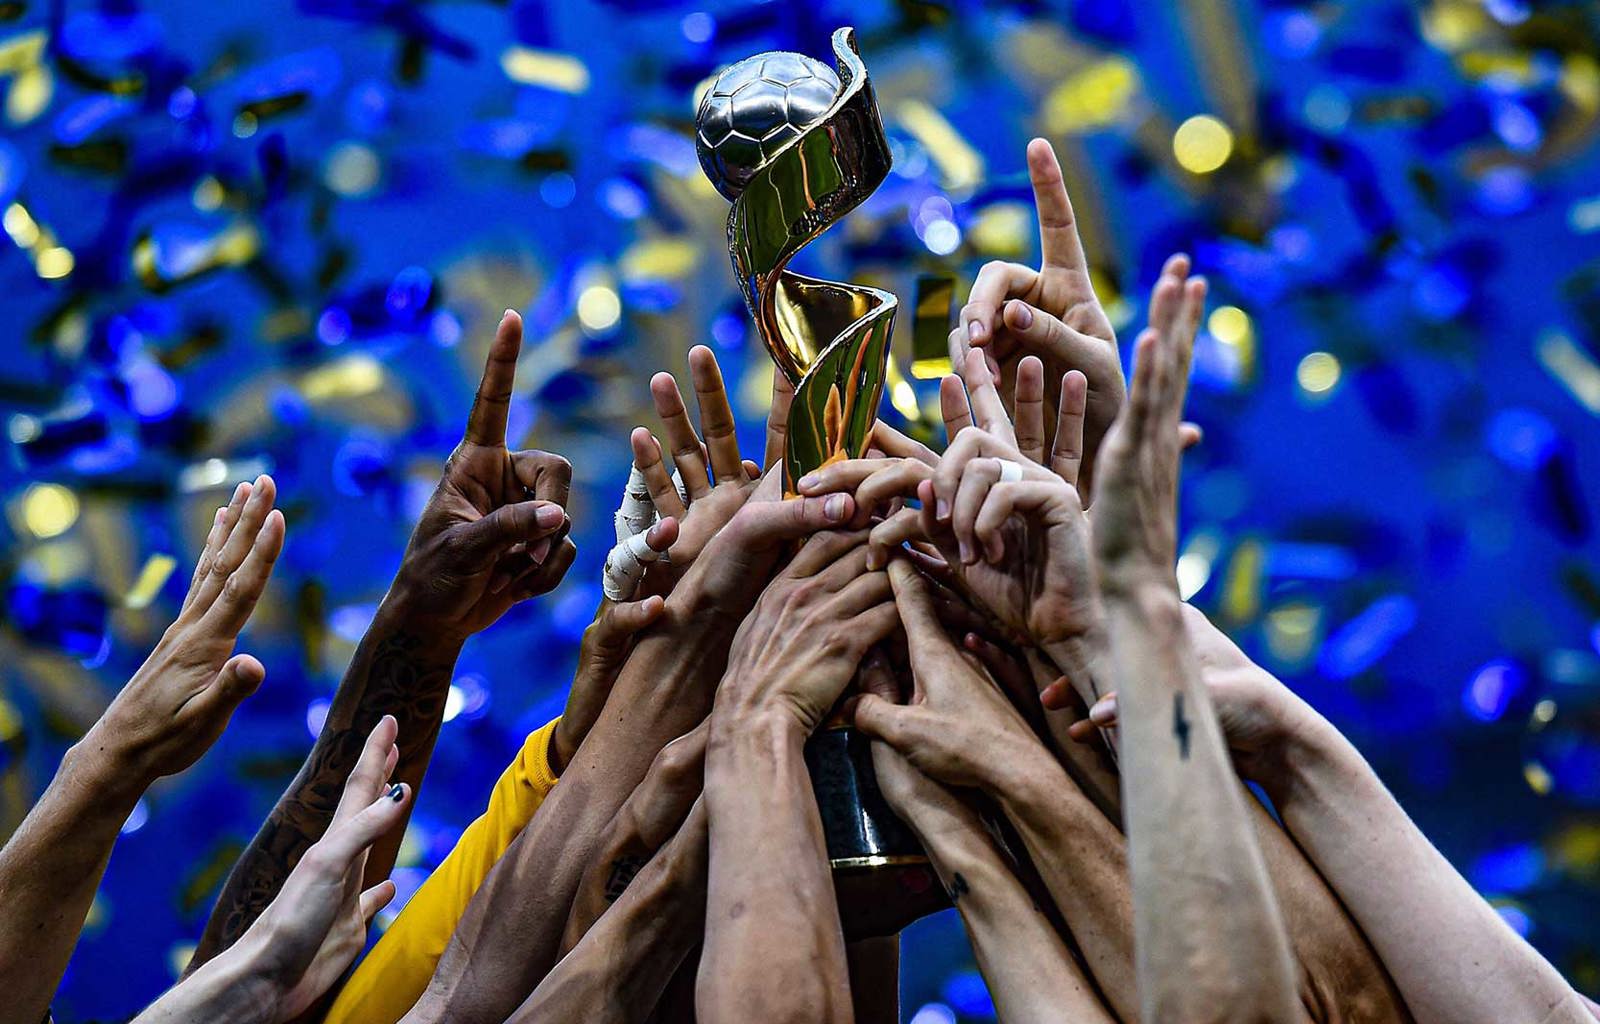 How FIFPRO helped make the 2023 Women's World Cup more professional and  equitable for players - FIFPRO World Players' Union